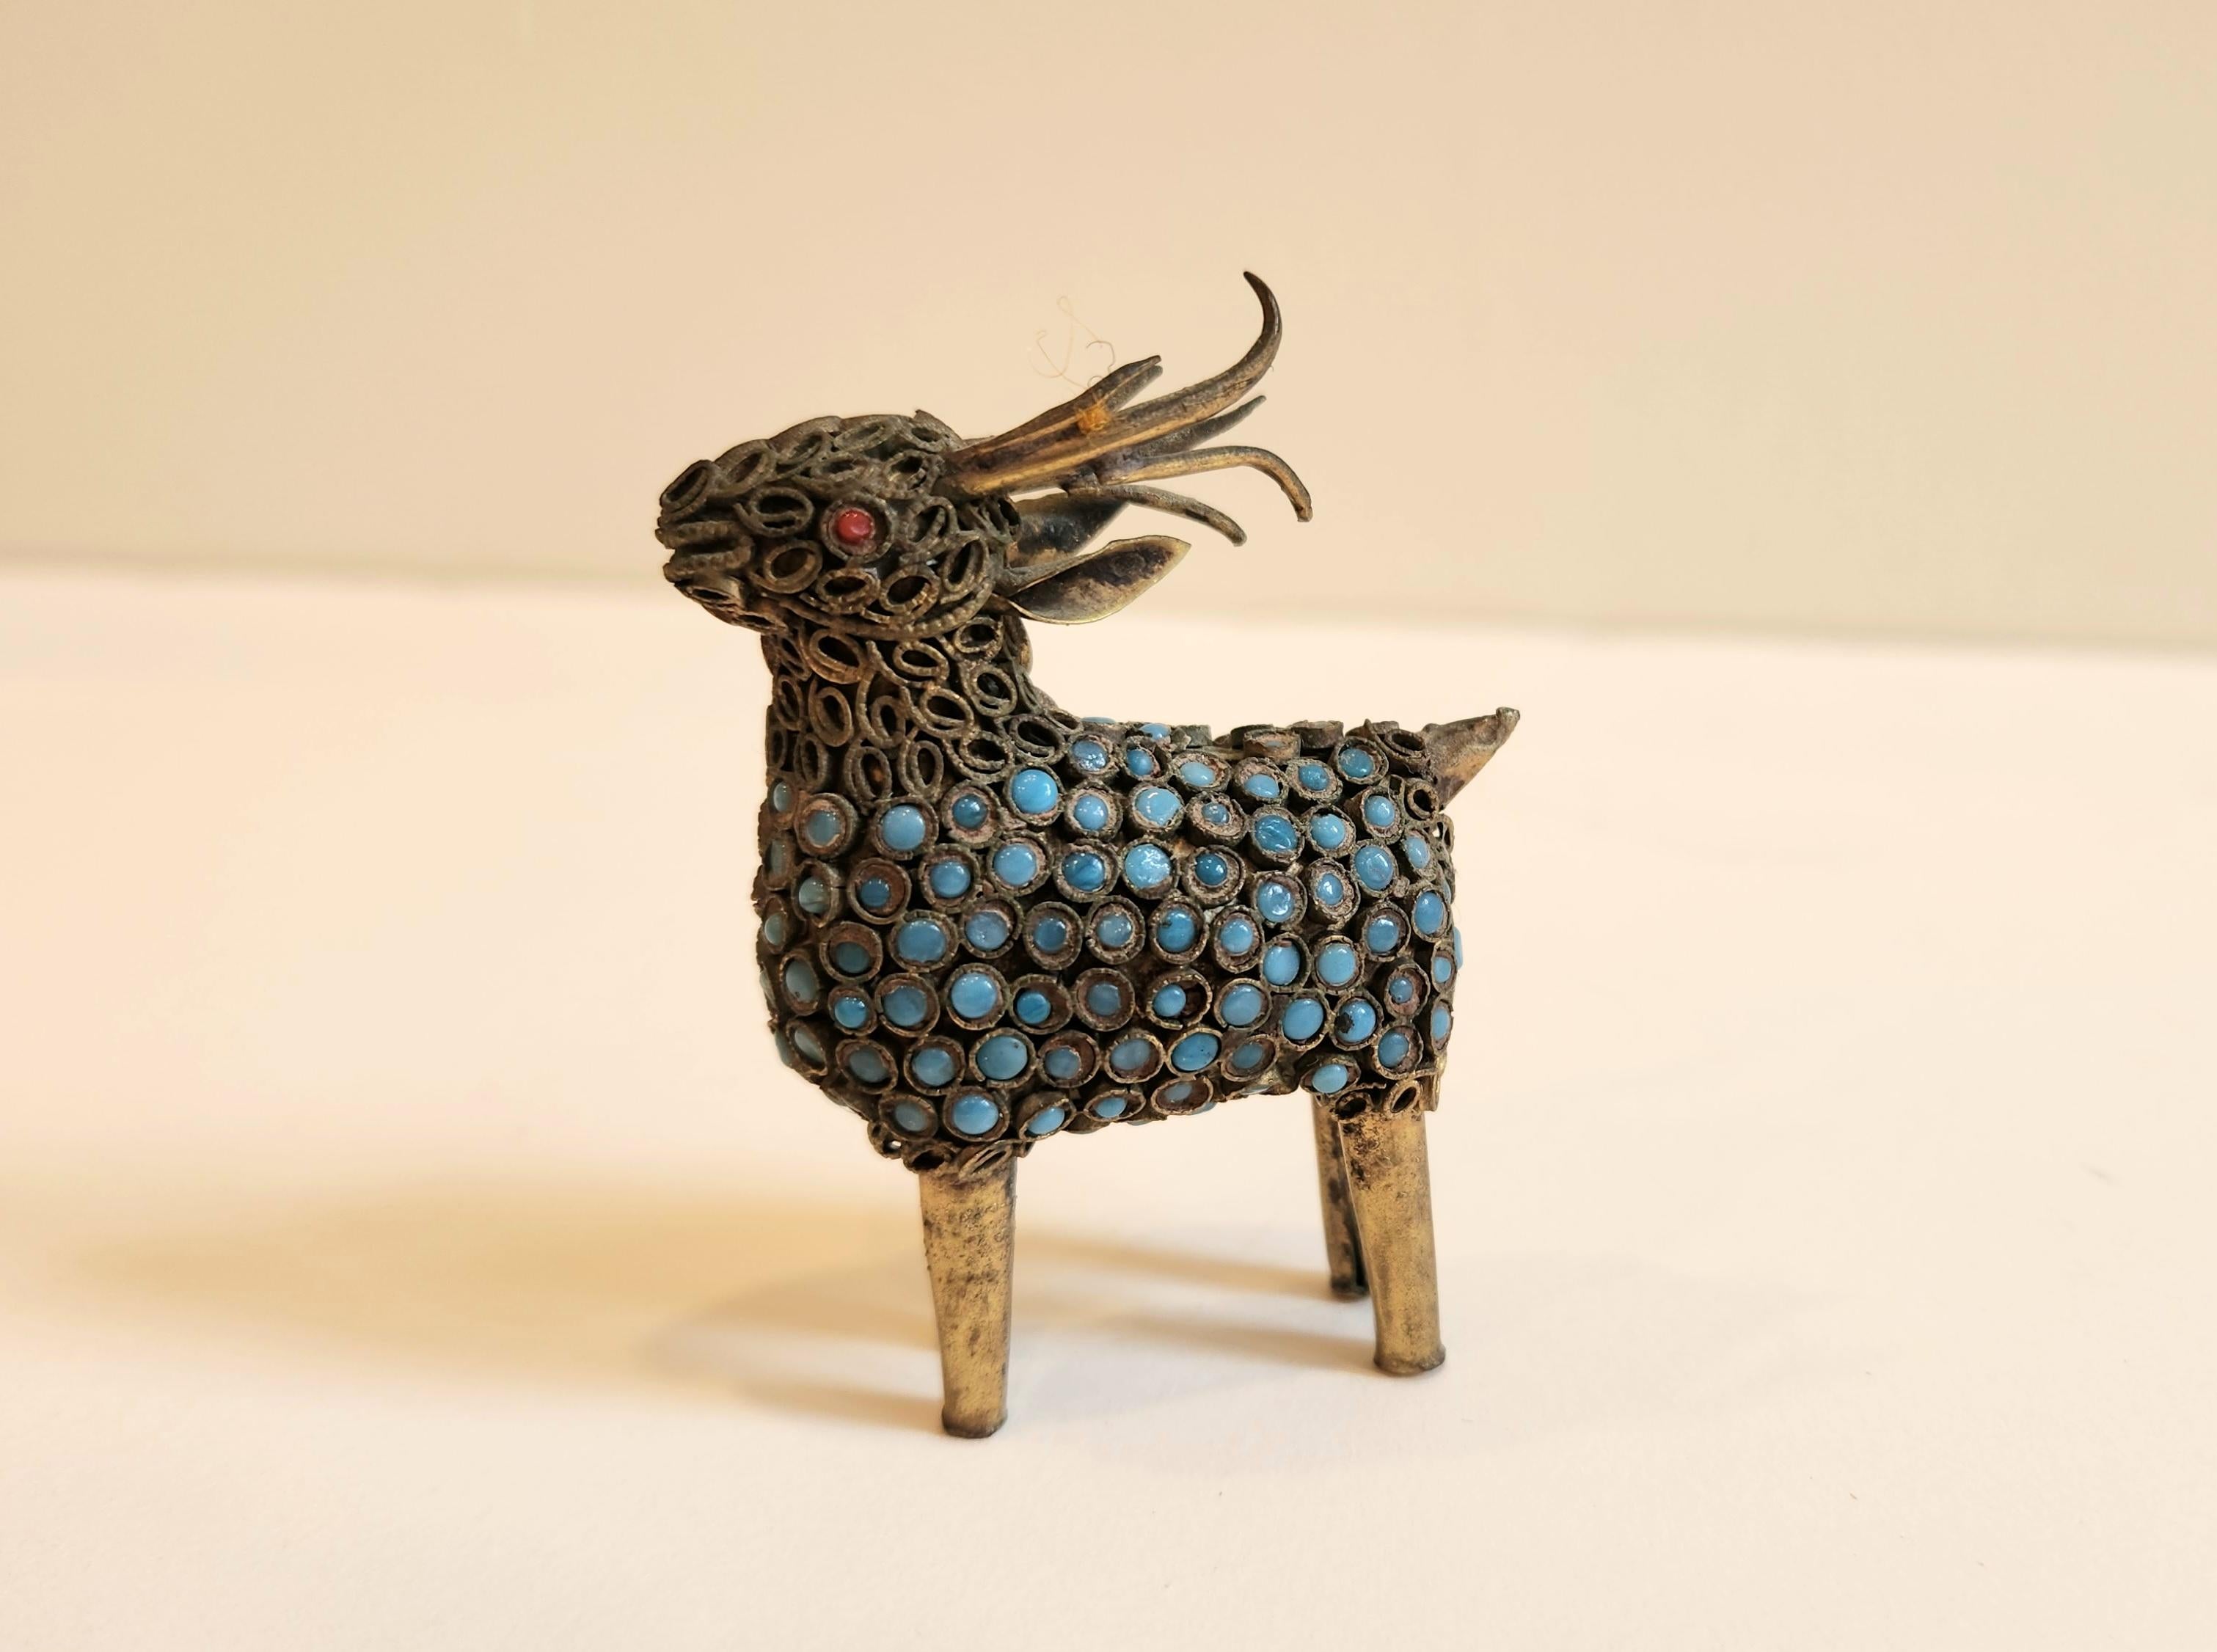 Turquoise and Coral Ram from Nepal - Other Art Style Sculpture by Unknown